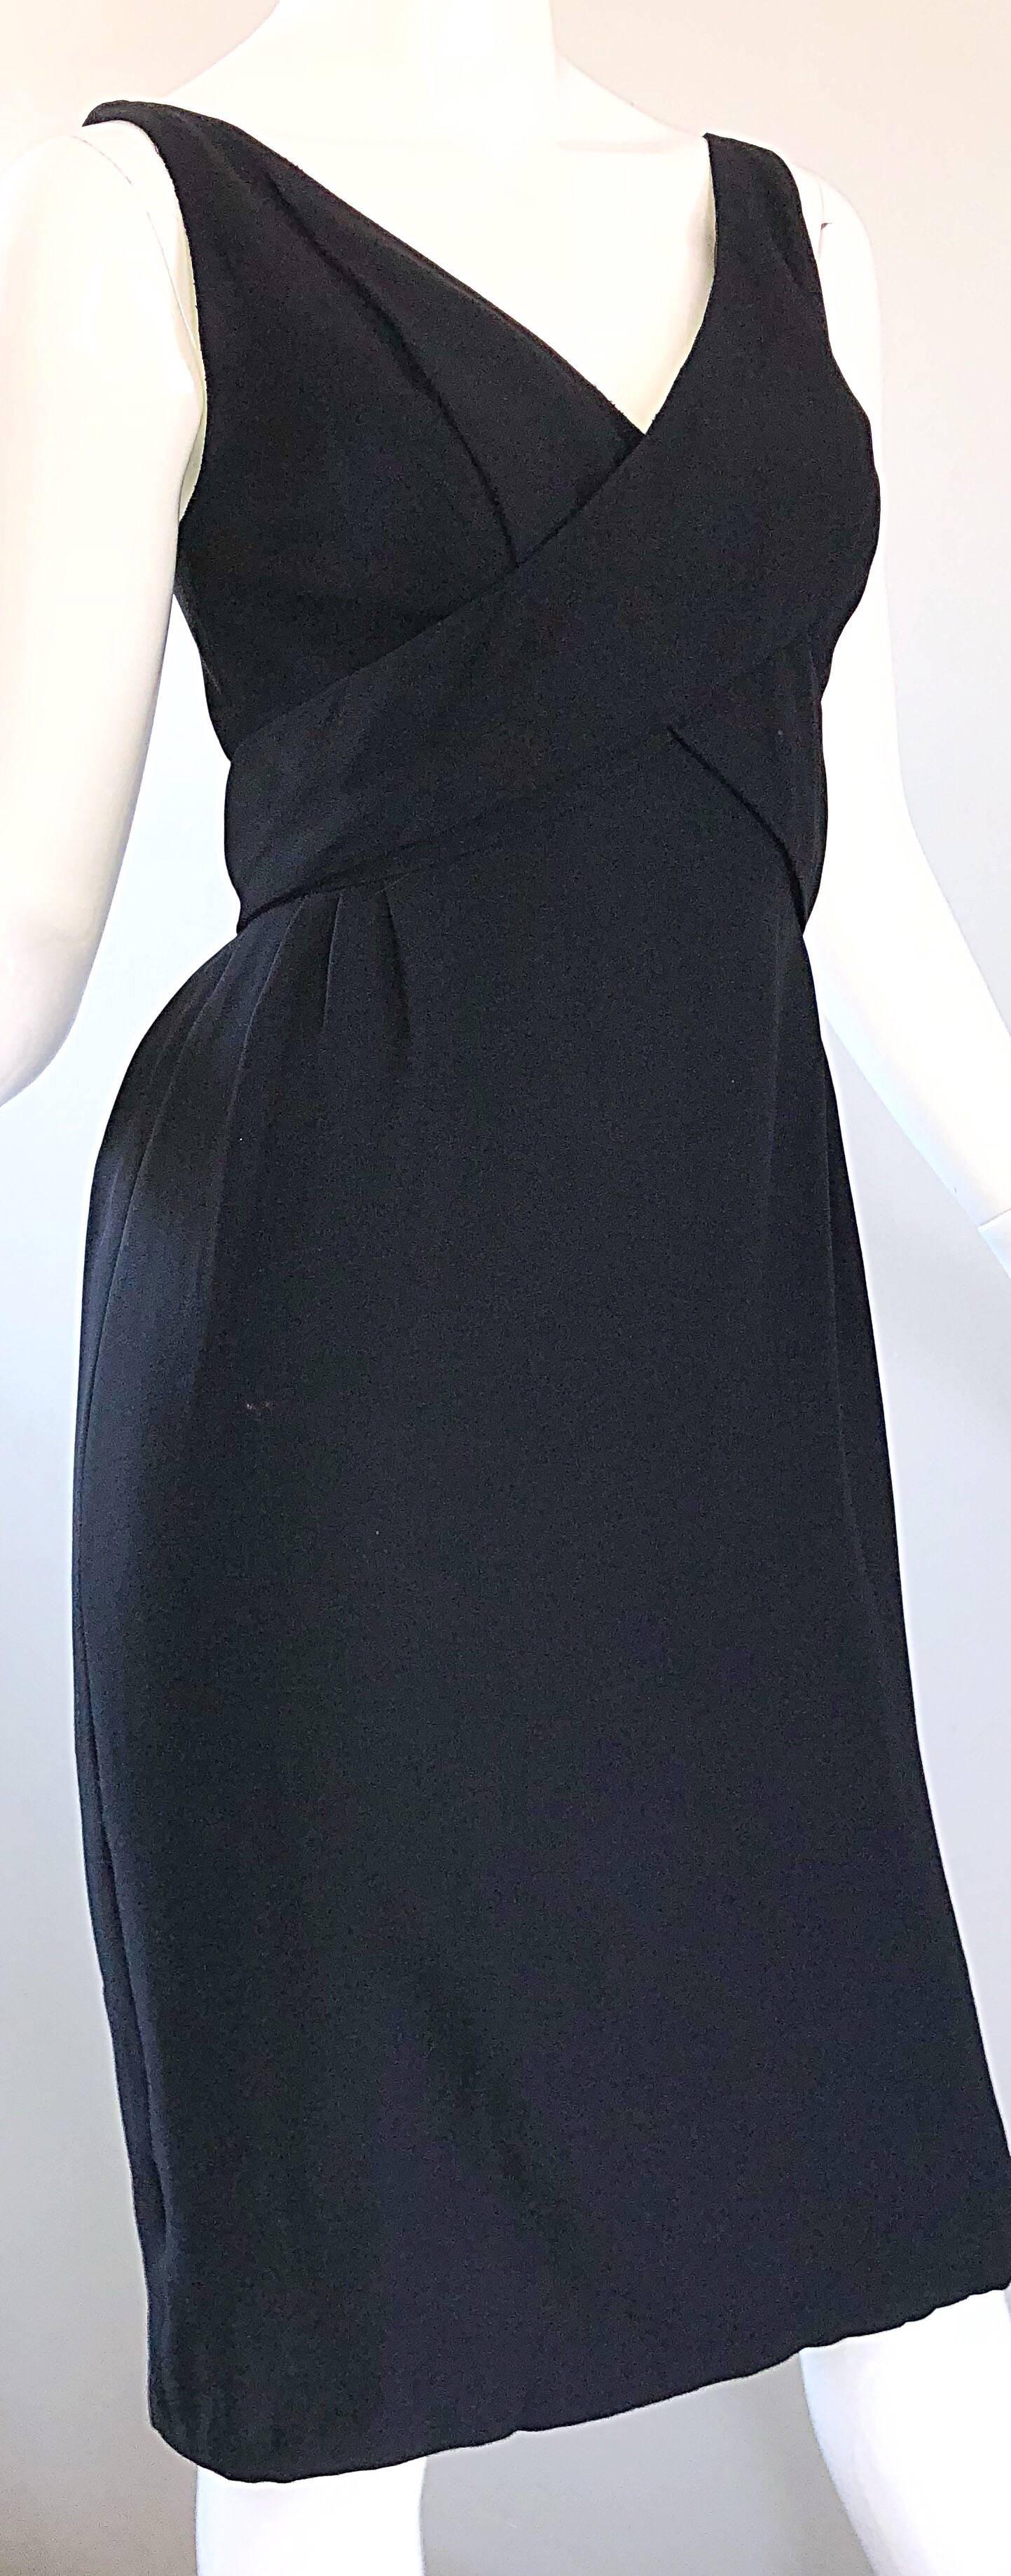 1950s Chic Crepe Sleeveless Perfect Vintage 50s Little Black Sheath Dress For Sale 2